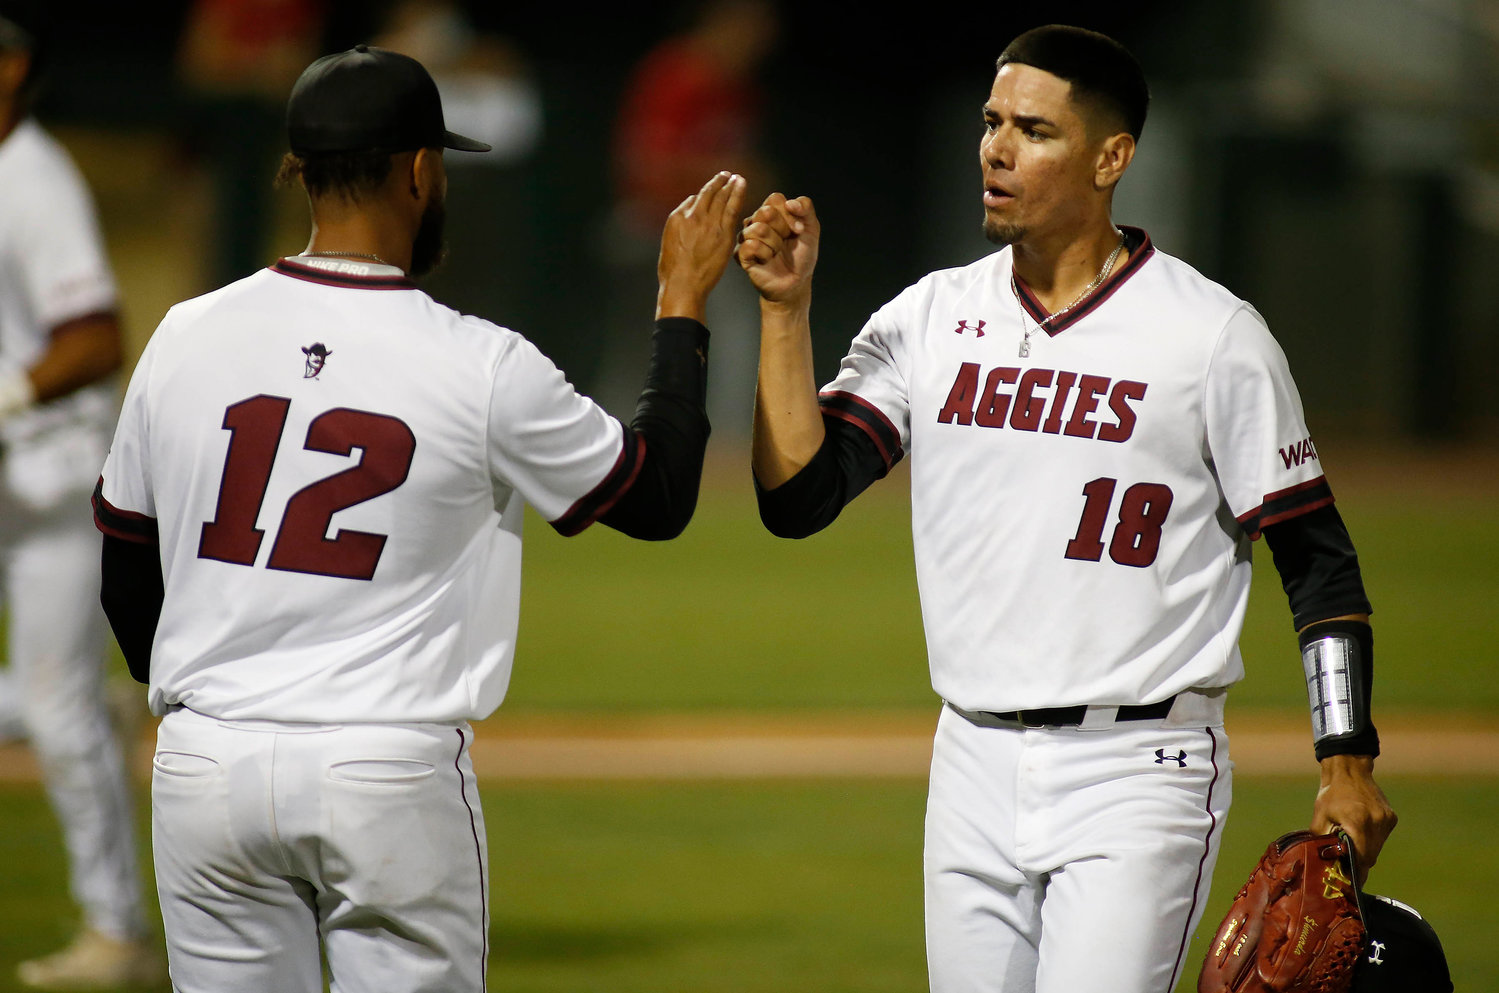 Relief pitcher Ian Mejia and starting pitcher Chris Jefferson celebrate the Aggies’ 7-5 win over Seattle U Wednesday night in Mesa, Arizona.